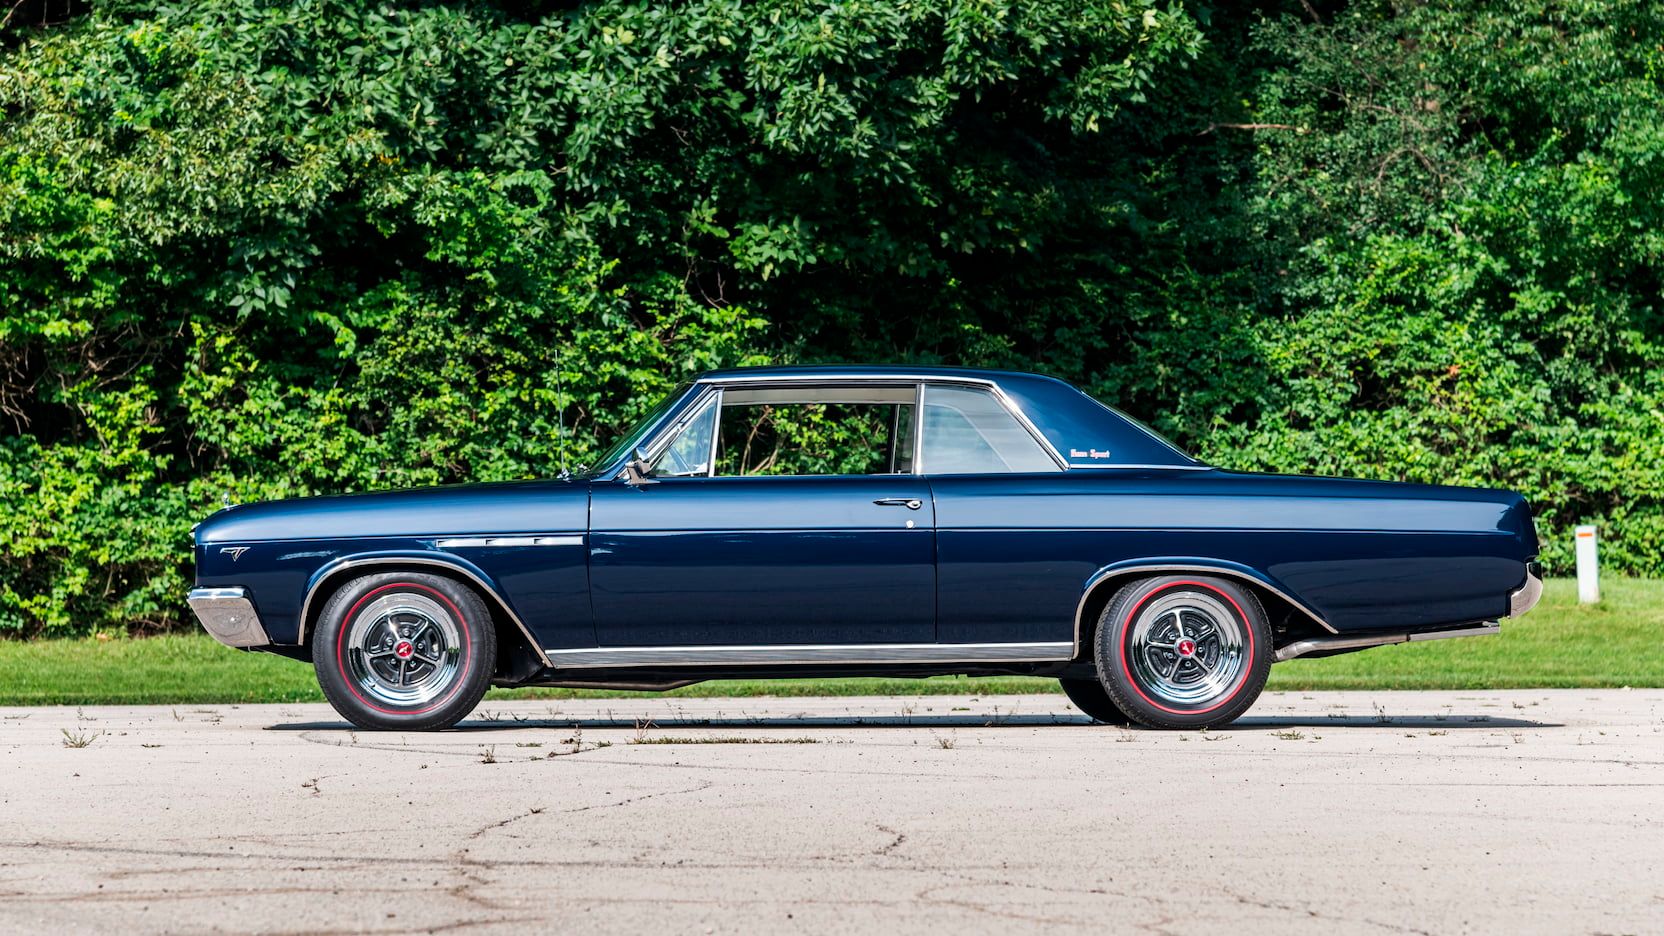 1965 Buick Skylark: The muscle car that started the year docile.